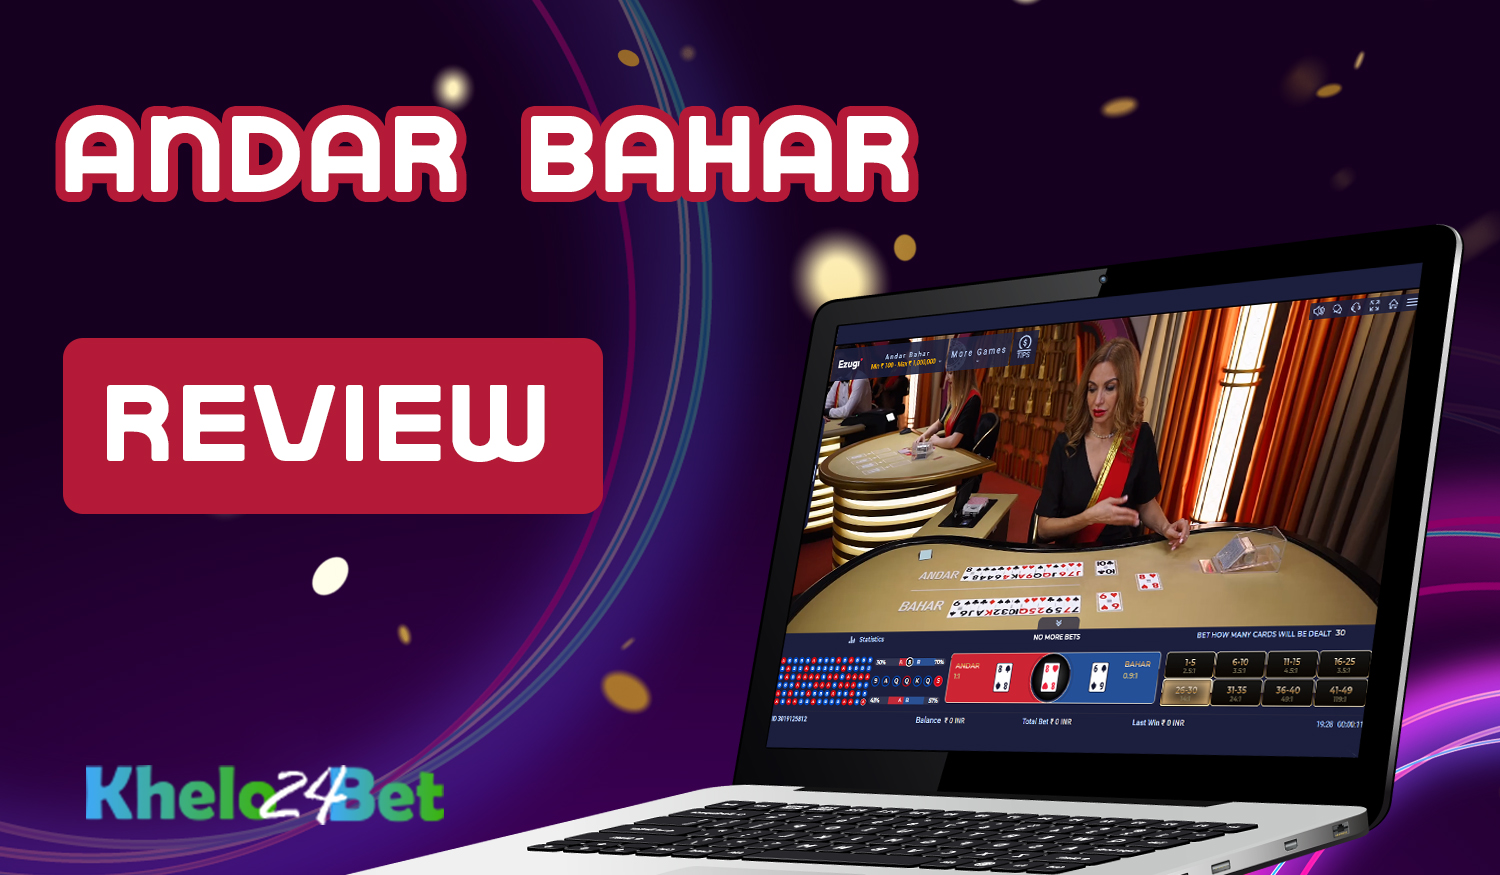 Detailed review of Andar Bahar game for Khelo24bet users